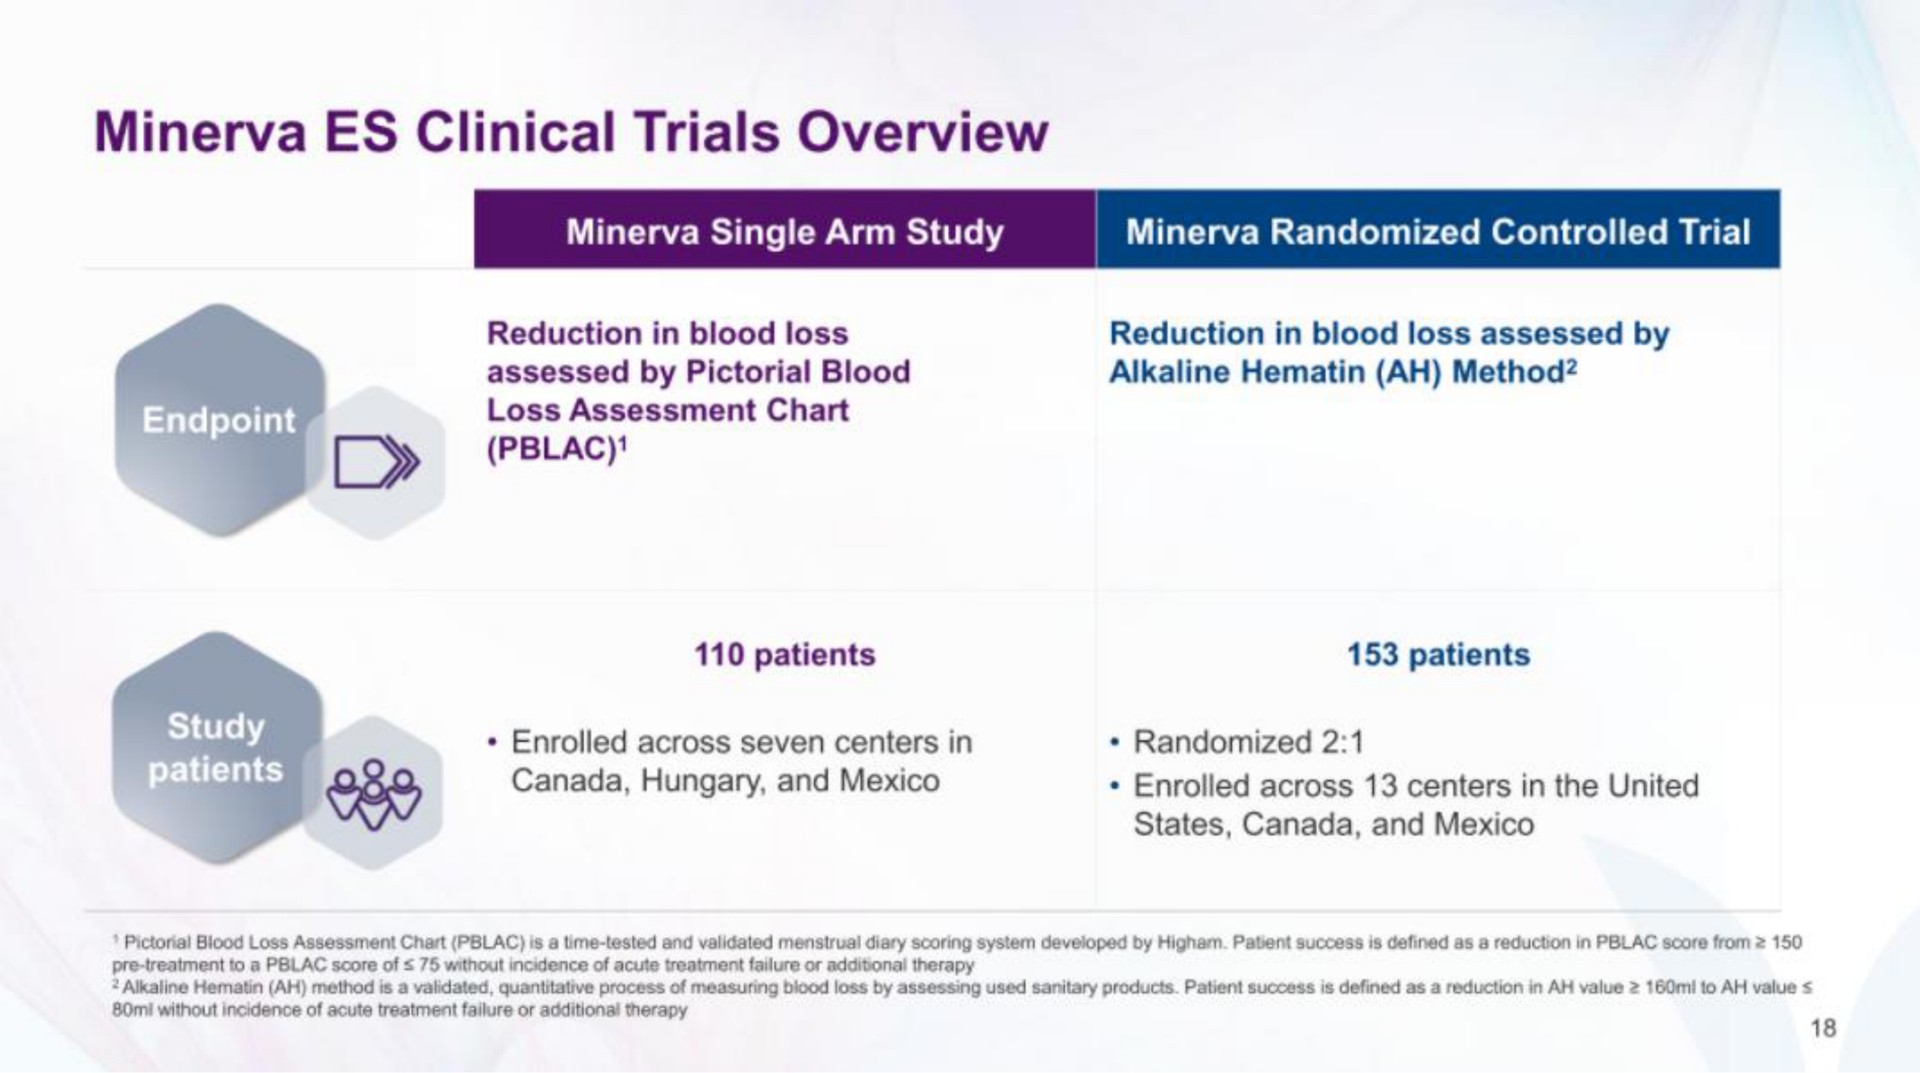 clinical trials overview | Minerva